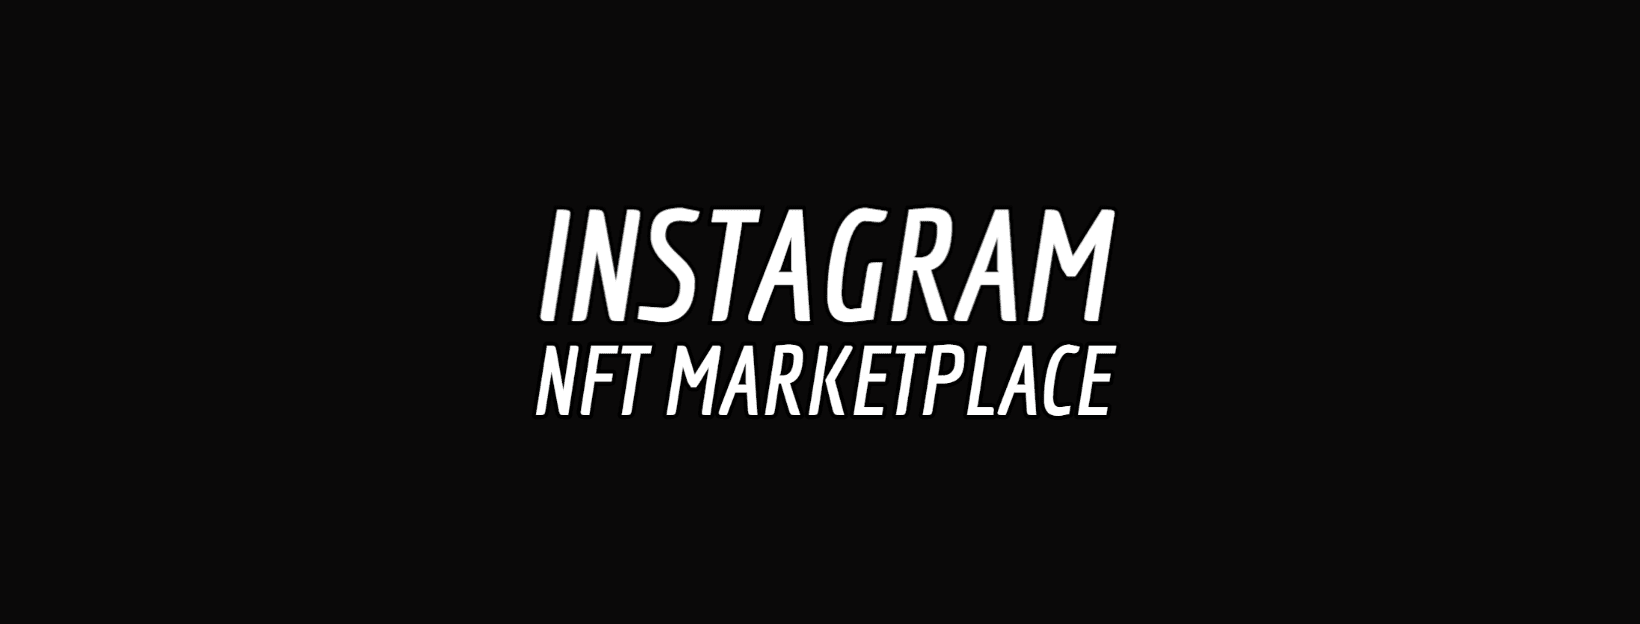 Instagram becomes an NFT marketplace